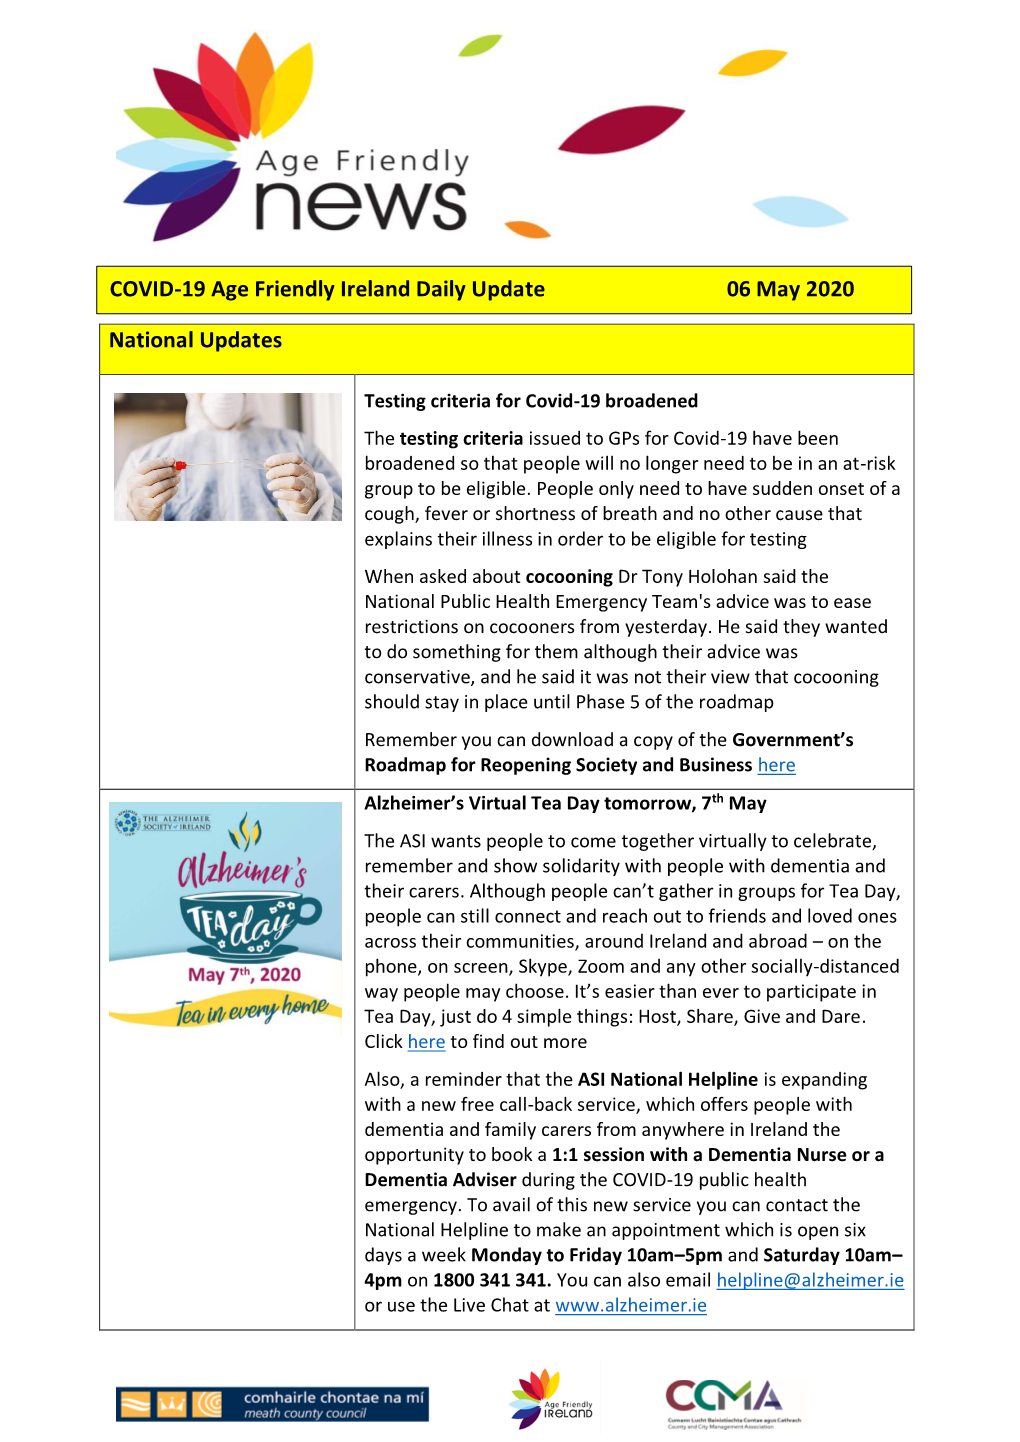 National Updates COVID-19 Age Friendly Ireland Daily Update 06 May 2020